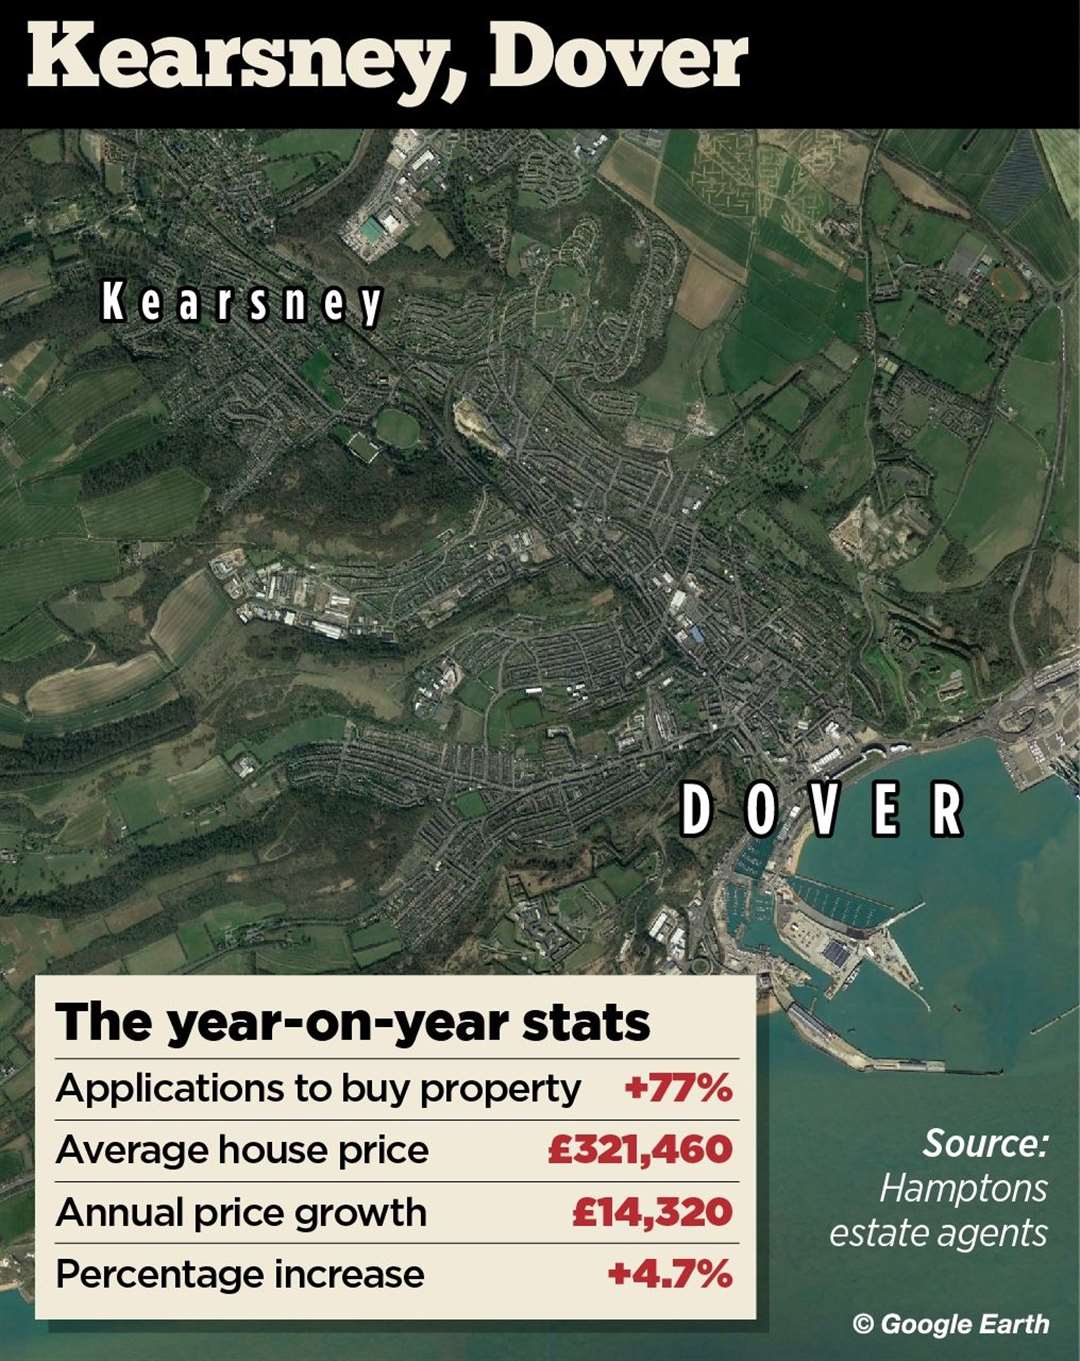 Kearsney in Dover saw 77% more people apply to buy a house there compared to last year